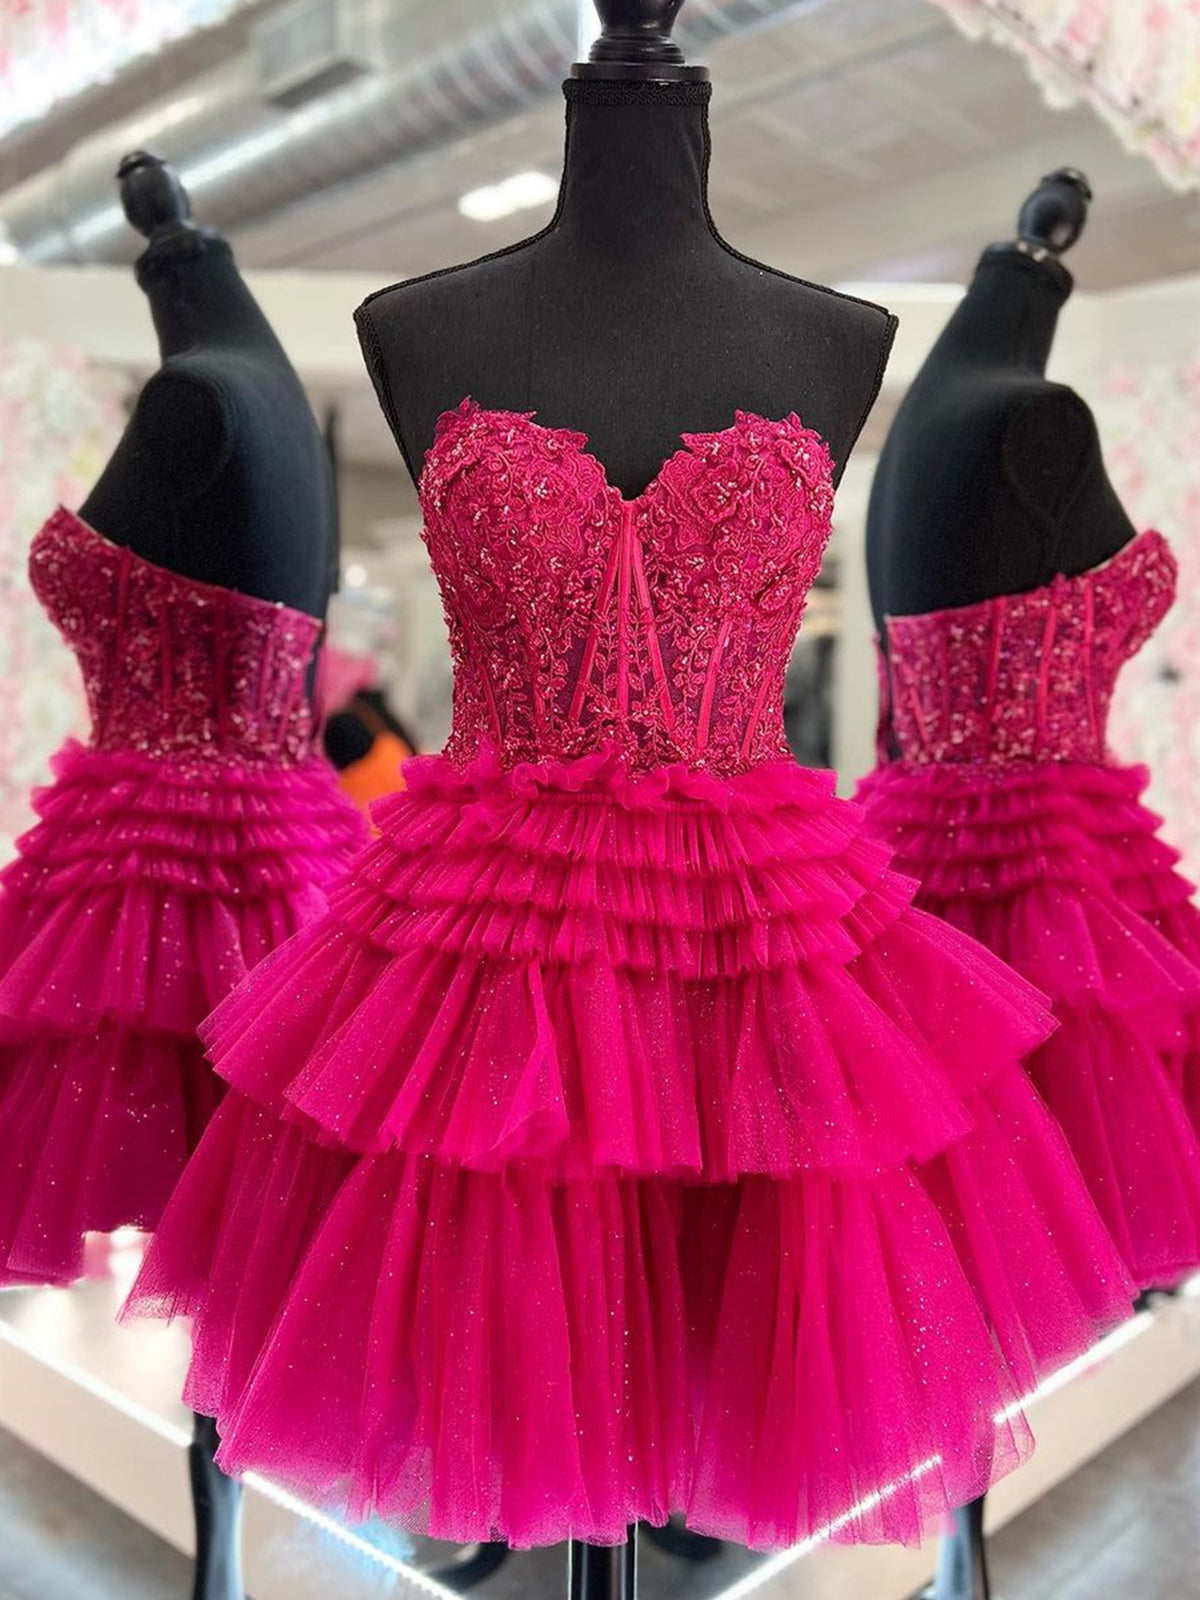 Strapless Short Fuchsia Black Pink Lace Prom Dresses For Black girls For Women, Short Lace Formal Homecoming Dresses